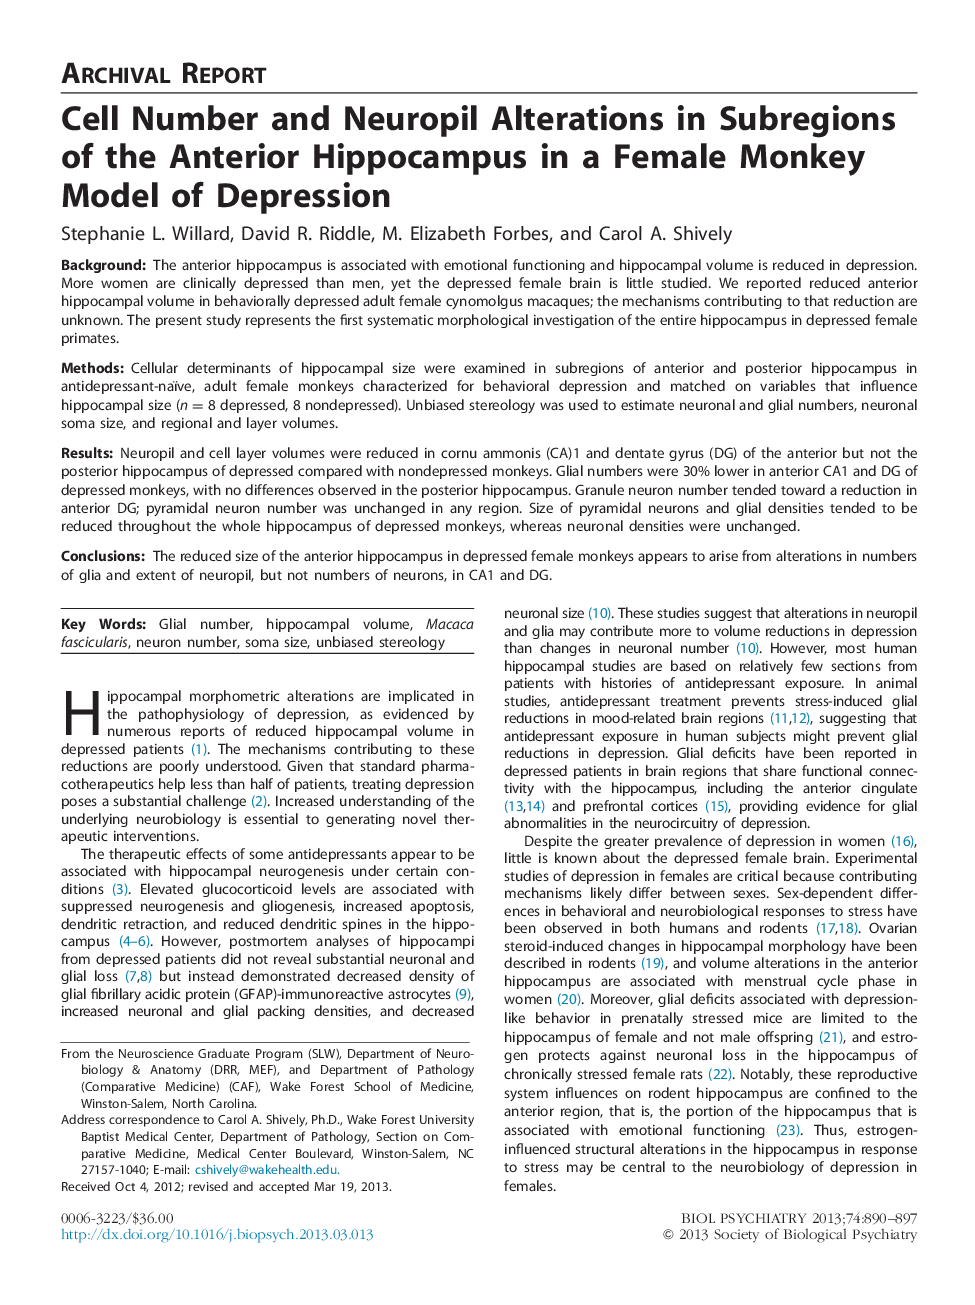 Cell Number and Neuropil Alterations in Subregions of the Anterior Hippocampus in a Female Monkey Model of Depression